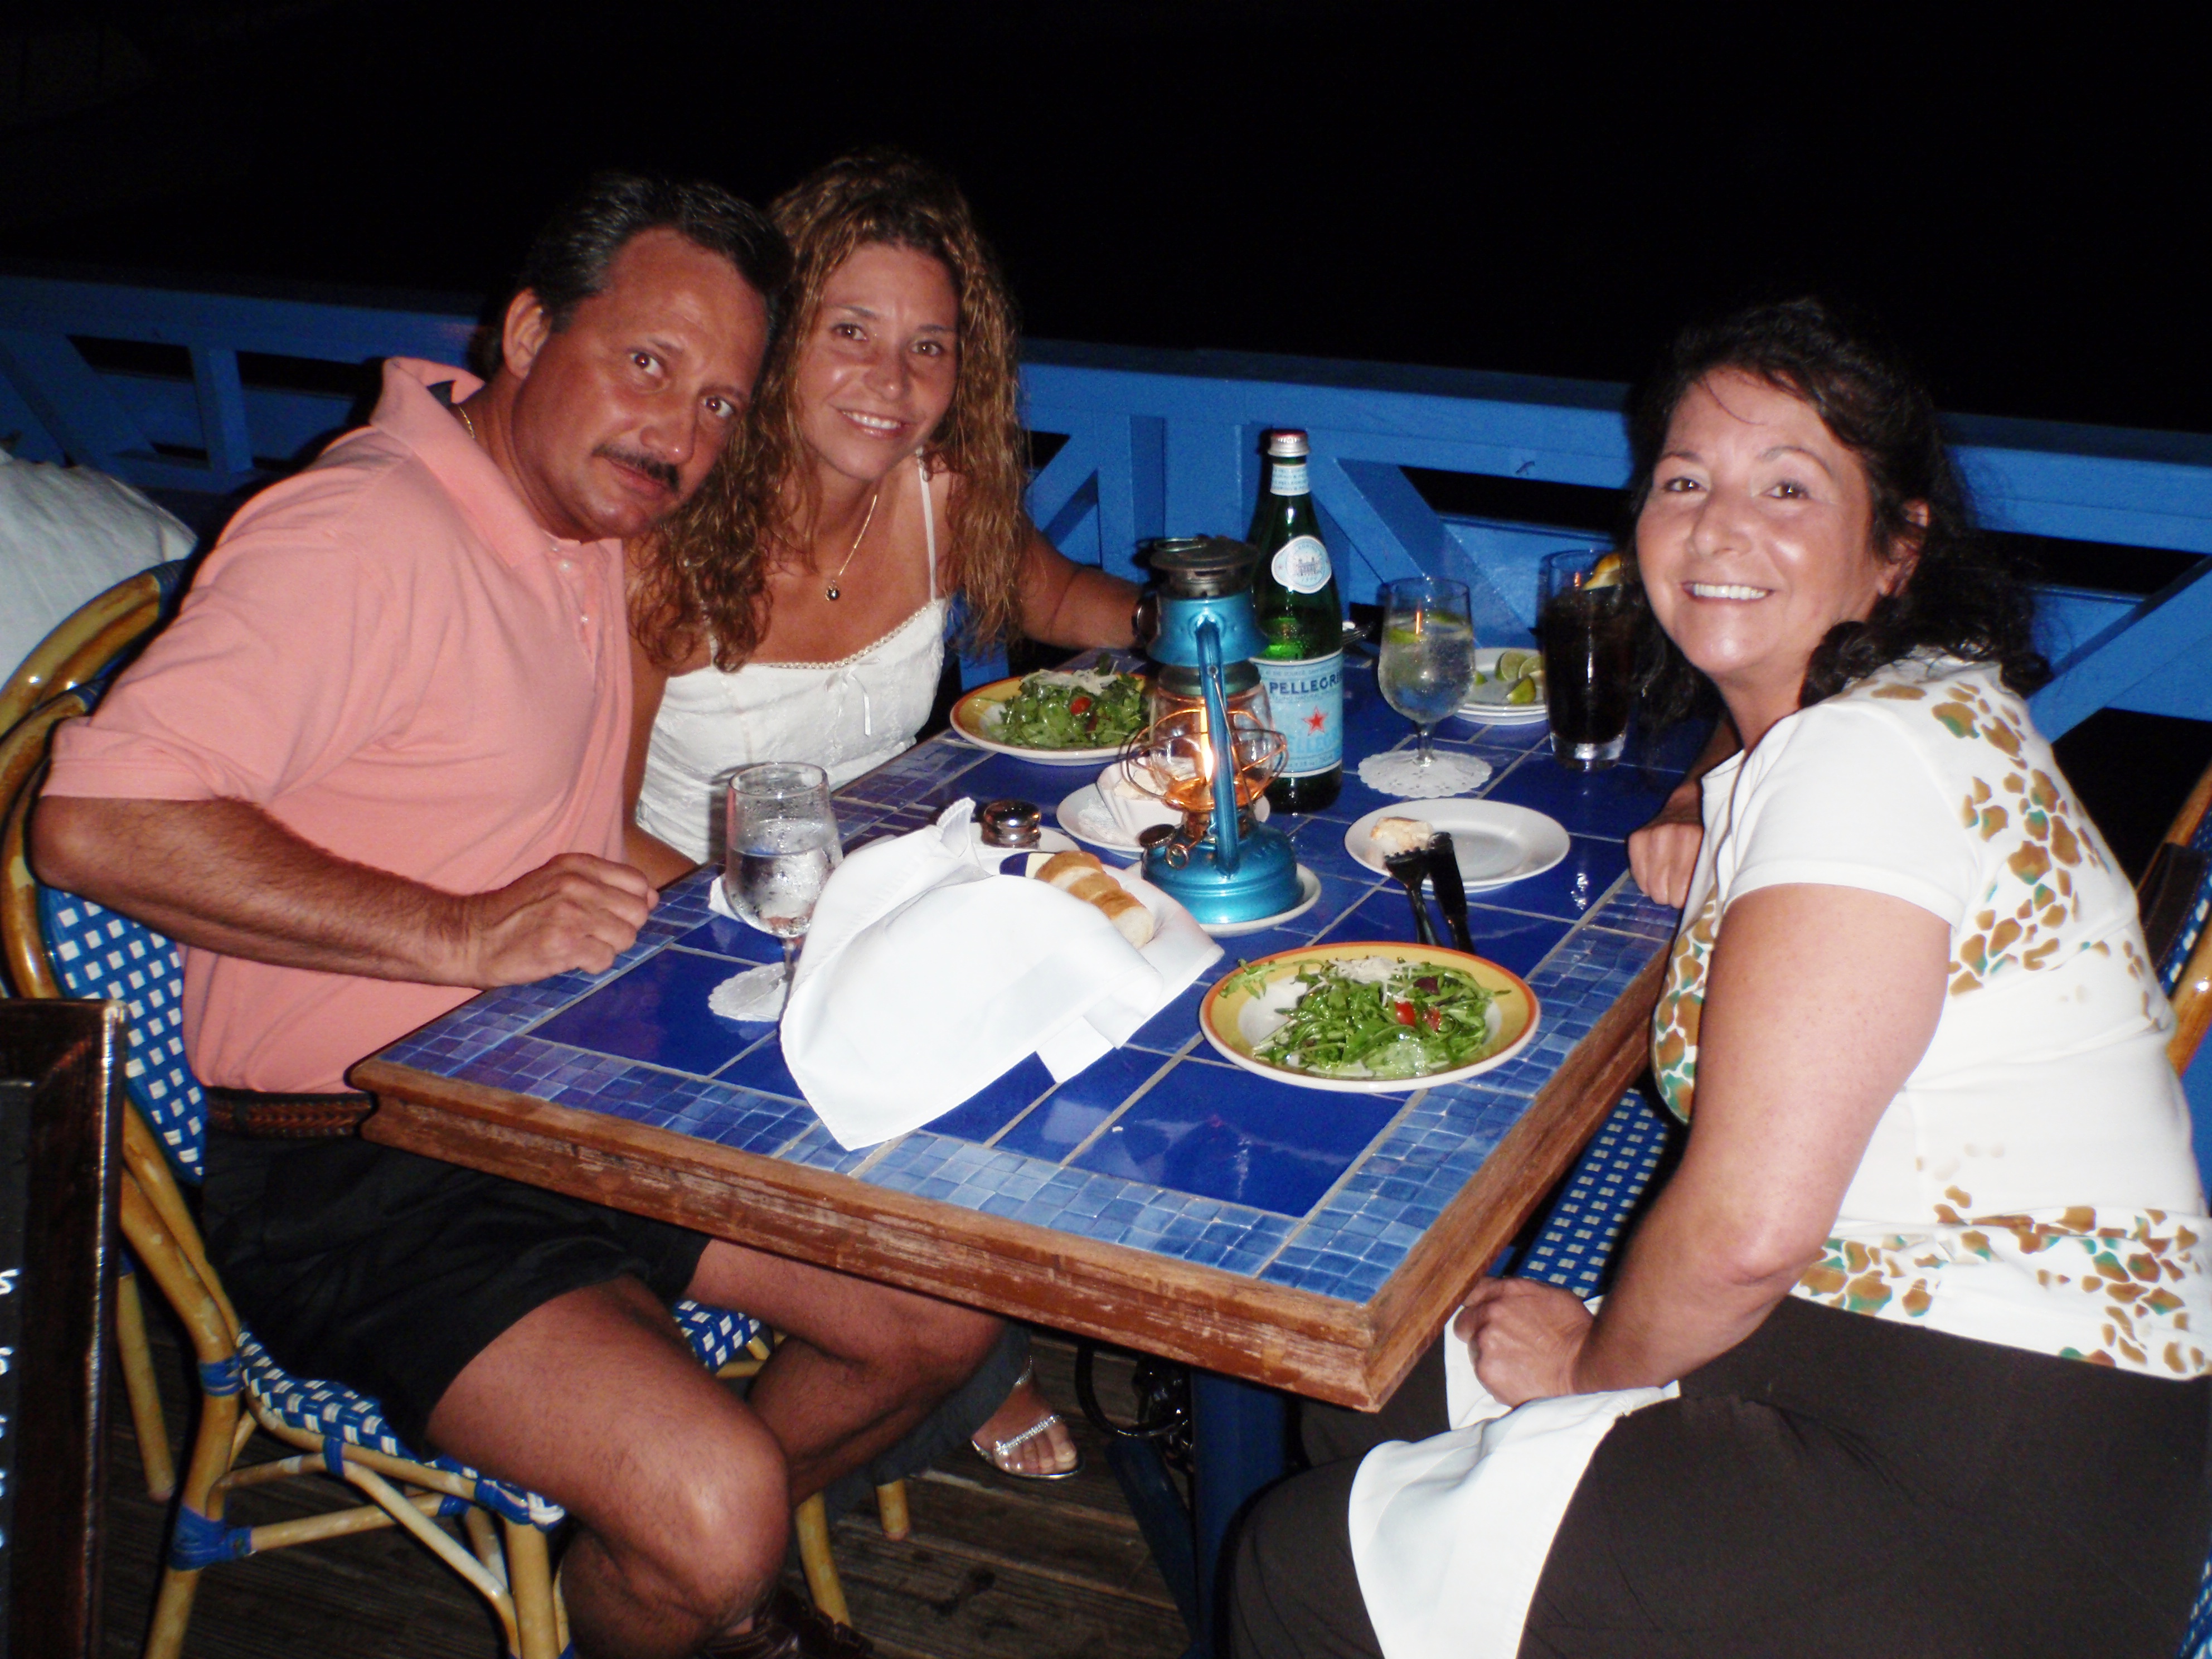 dinner with friends and family at an oceanfront restaurant in Aruba